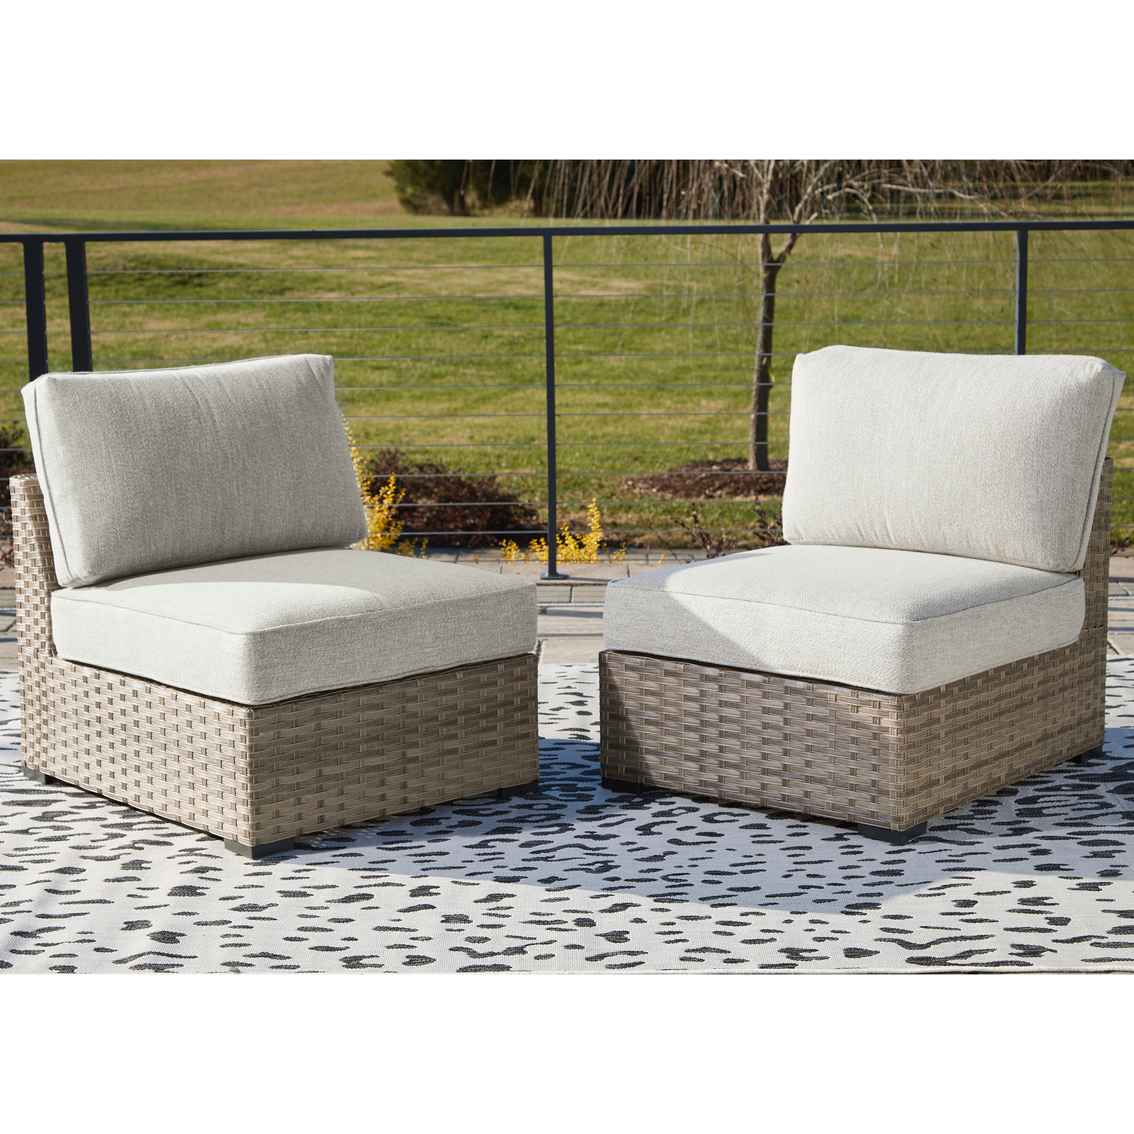 Signature Design by Ashley Calworth Outdoor 5 pc. Set - Image 3 of 4